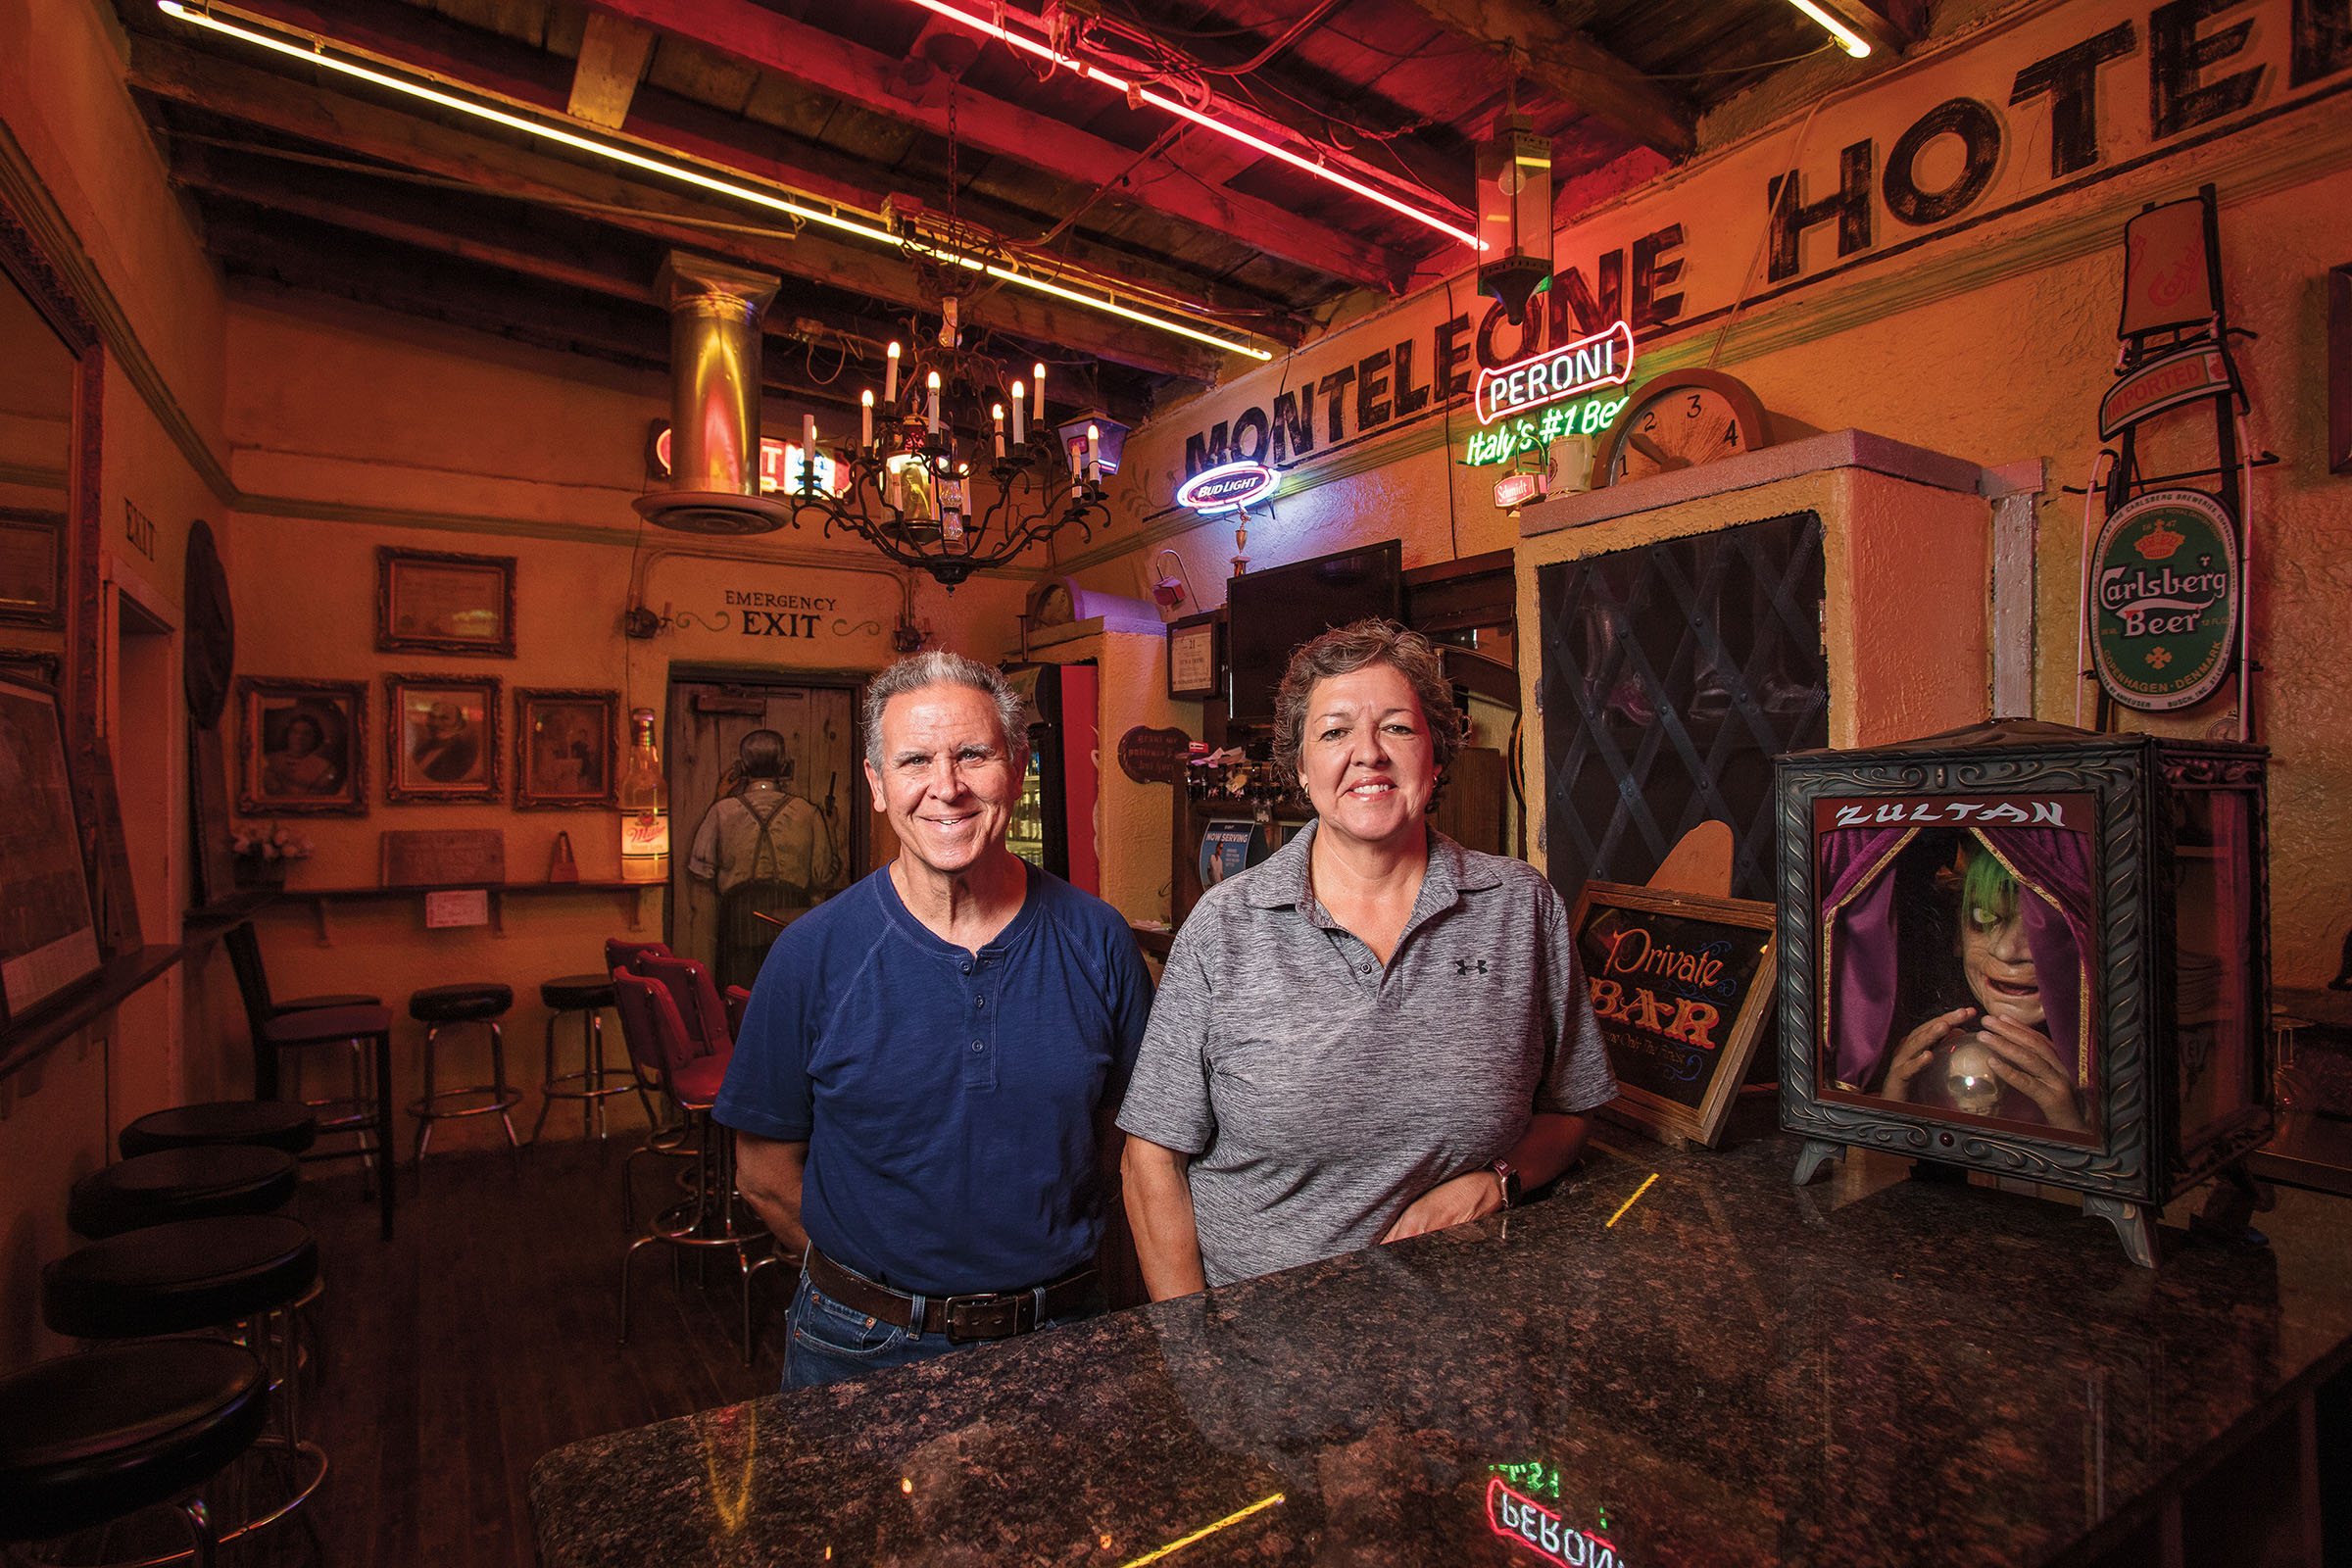 A man and woman stand behind a granite bar inside of an old-fashioned bulding with a candle chandelier and neon signs